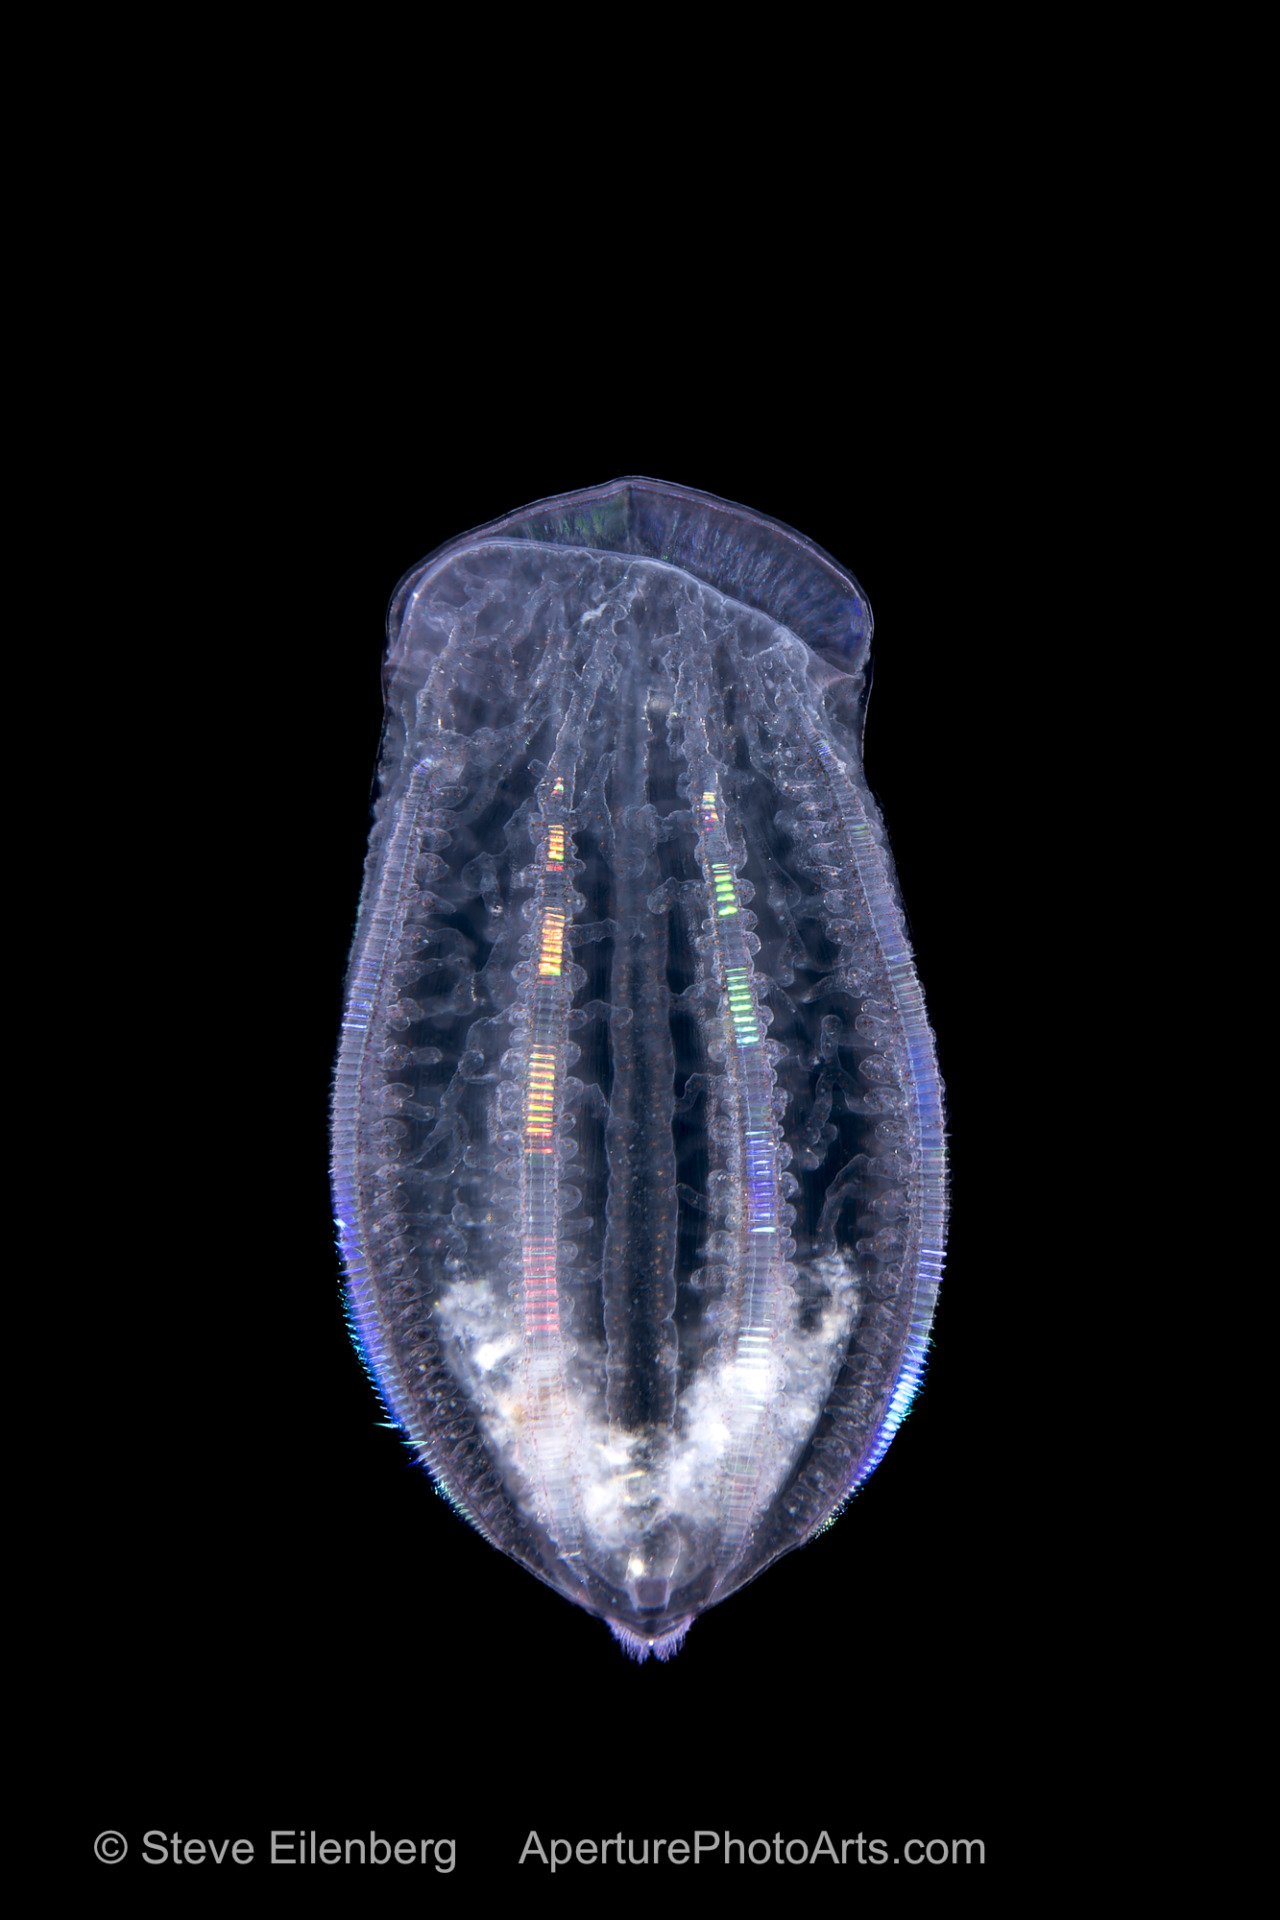 Colorful comb jelly